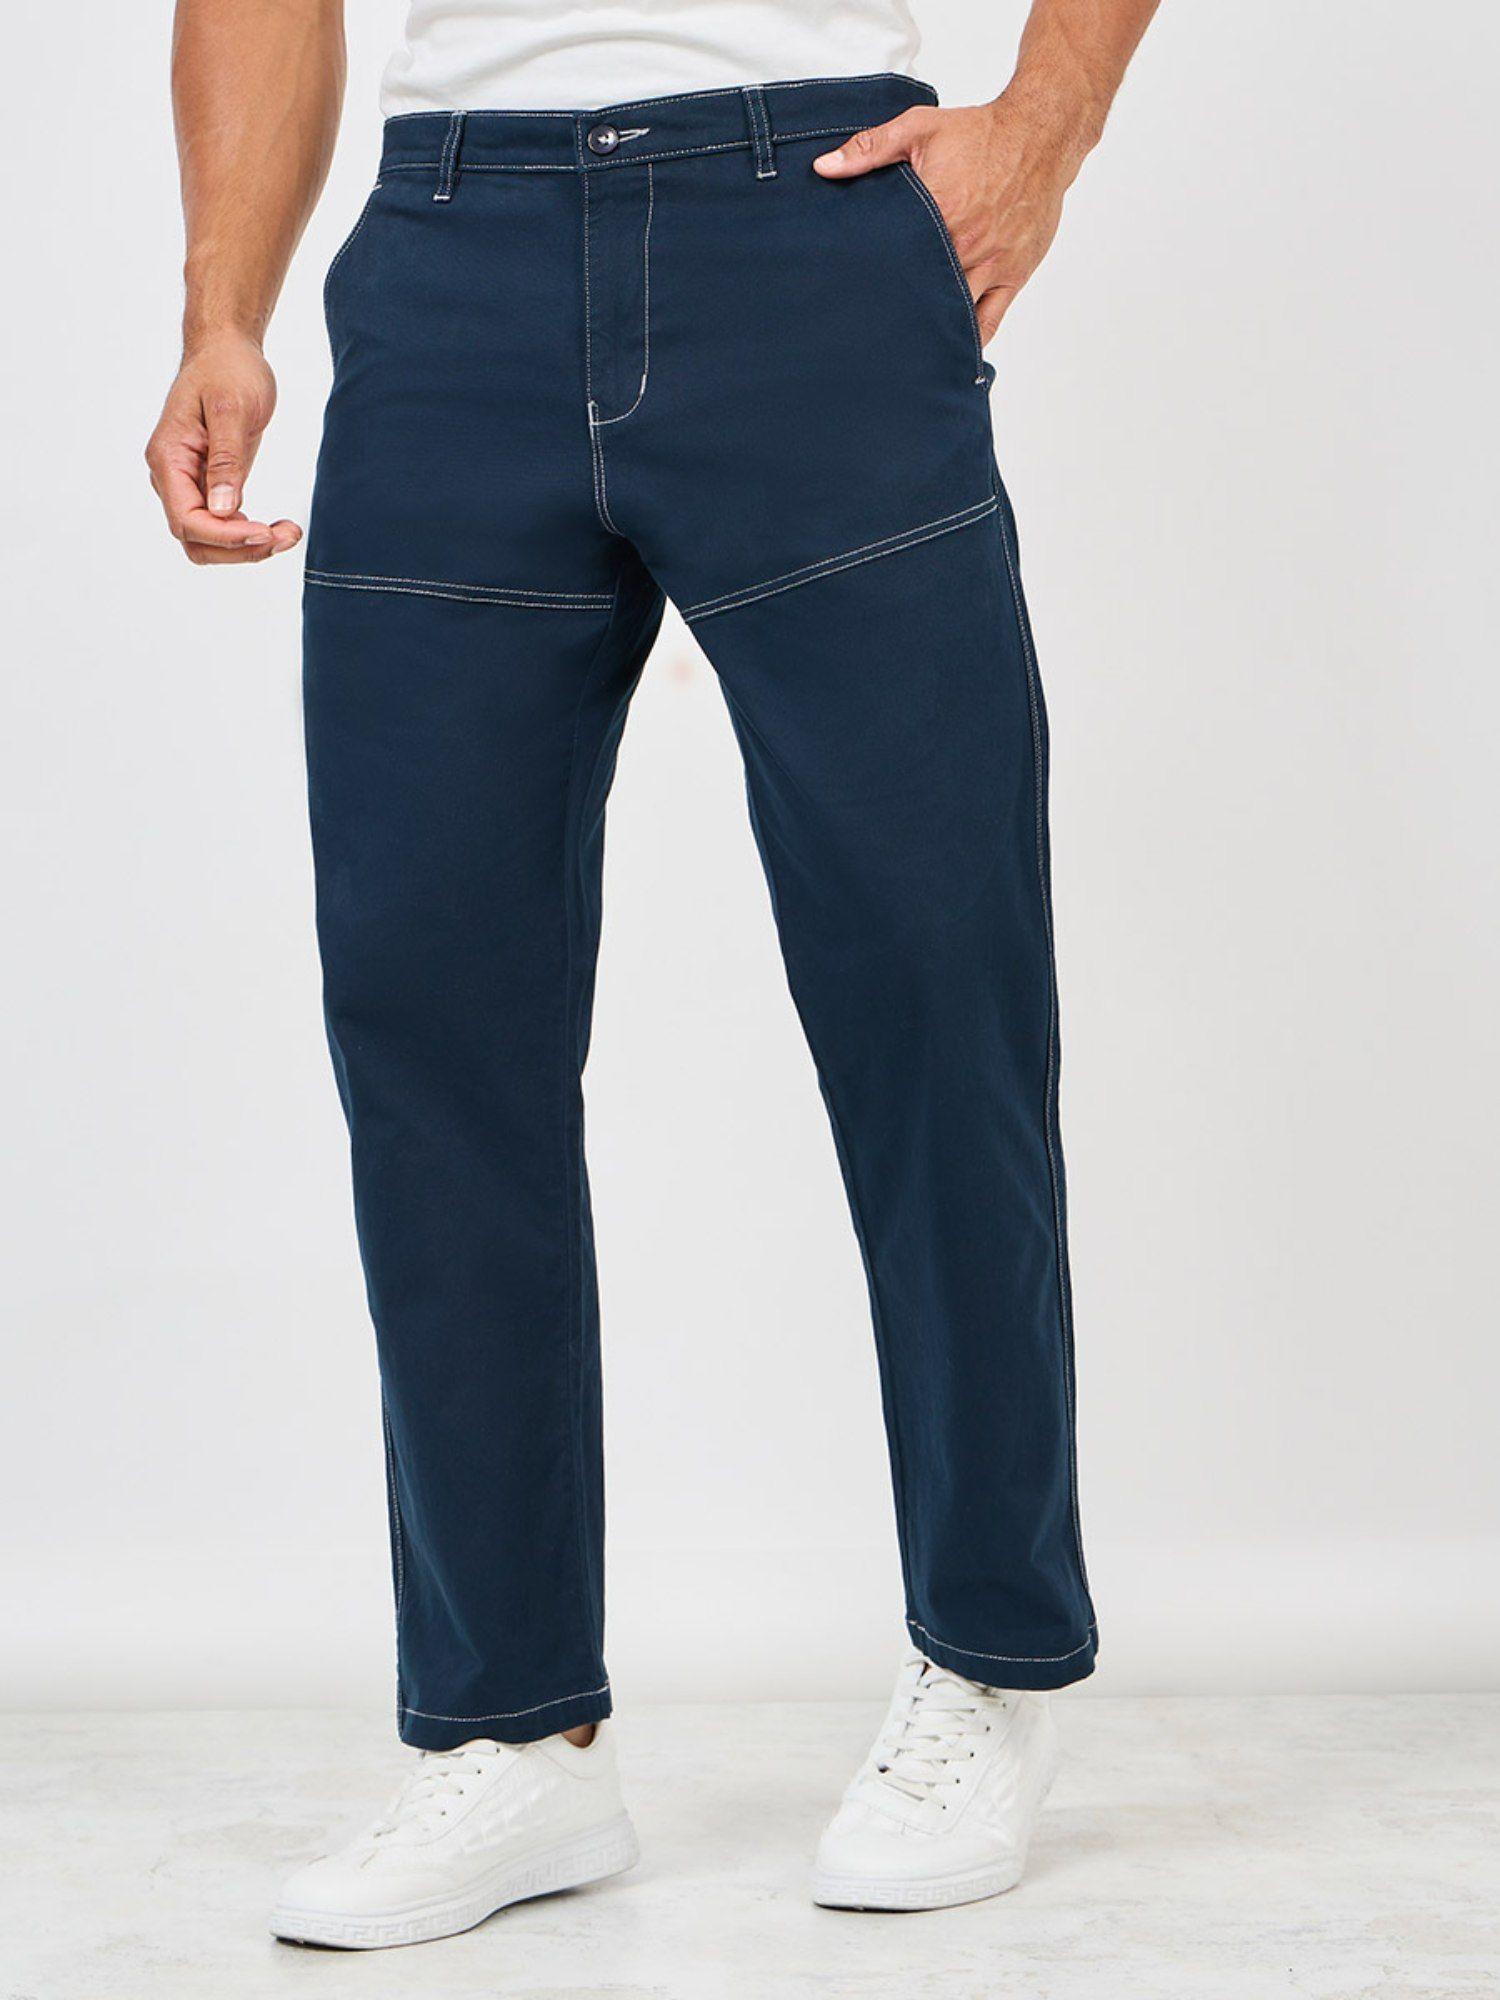 men's-navy-blue-contrast-stitch-relaxed-fit-cotton-chinos